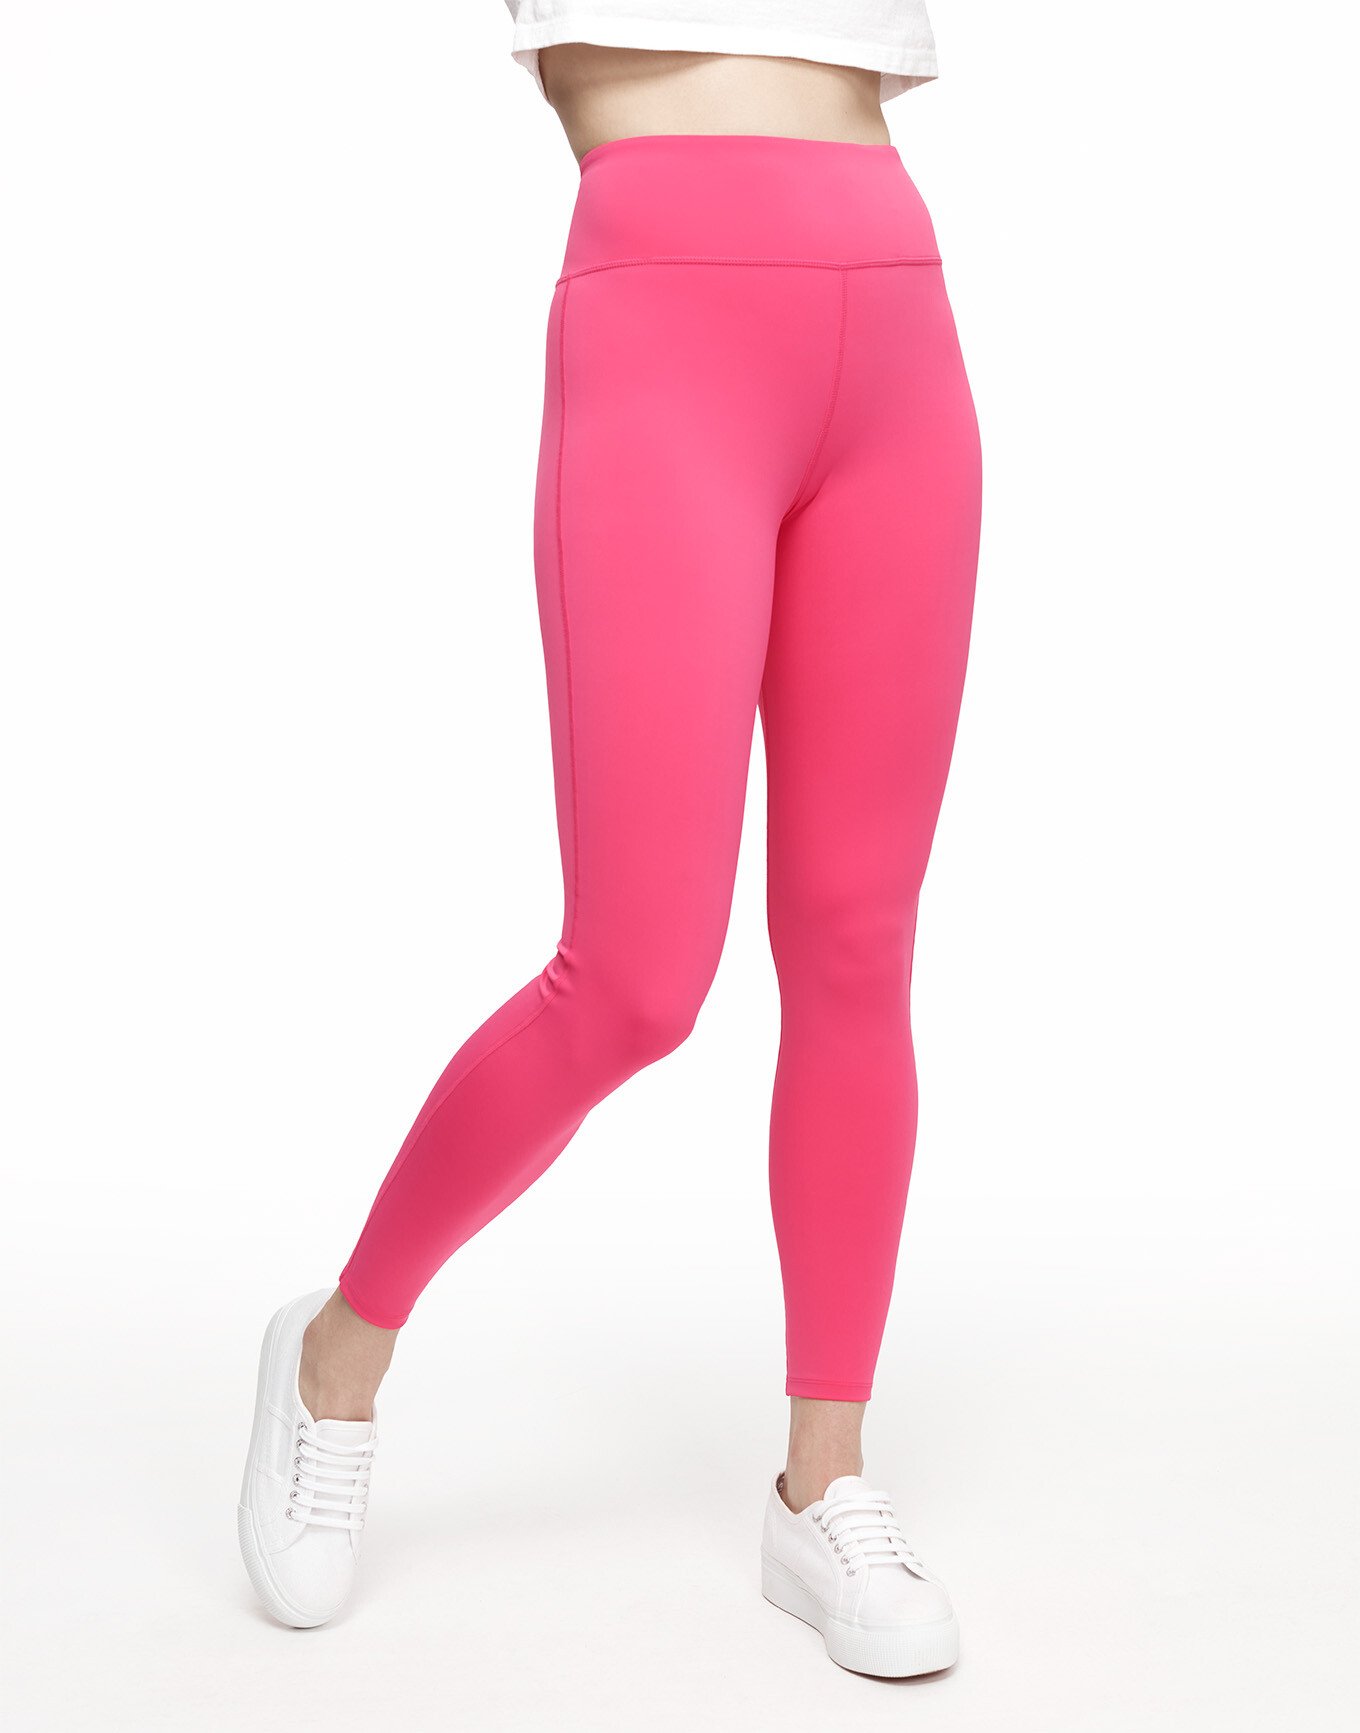 CAICJ98 Womens Leggings Cotton Women's Extra Long Leggings Tall Leggings  Over The Heel High Waisted with Back Pockets Hot Pink,XXL 